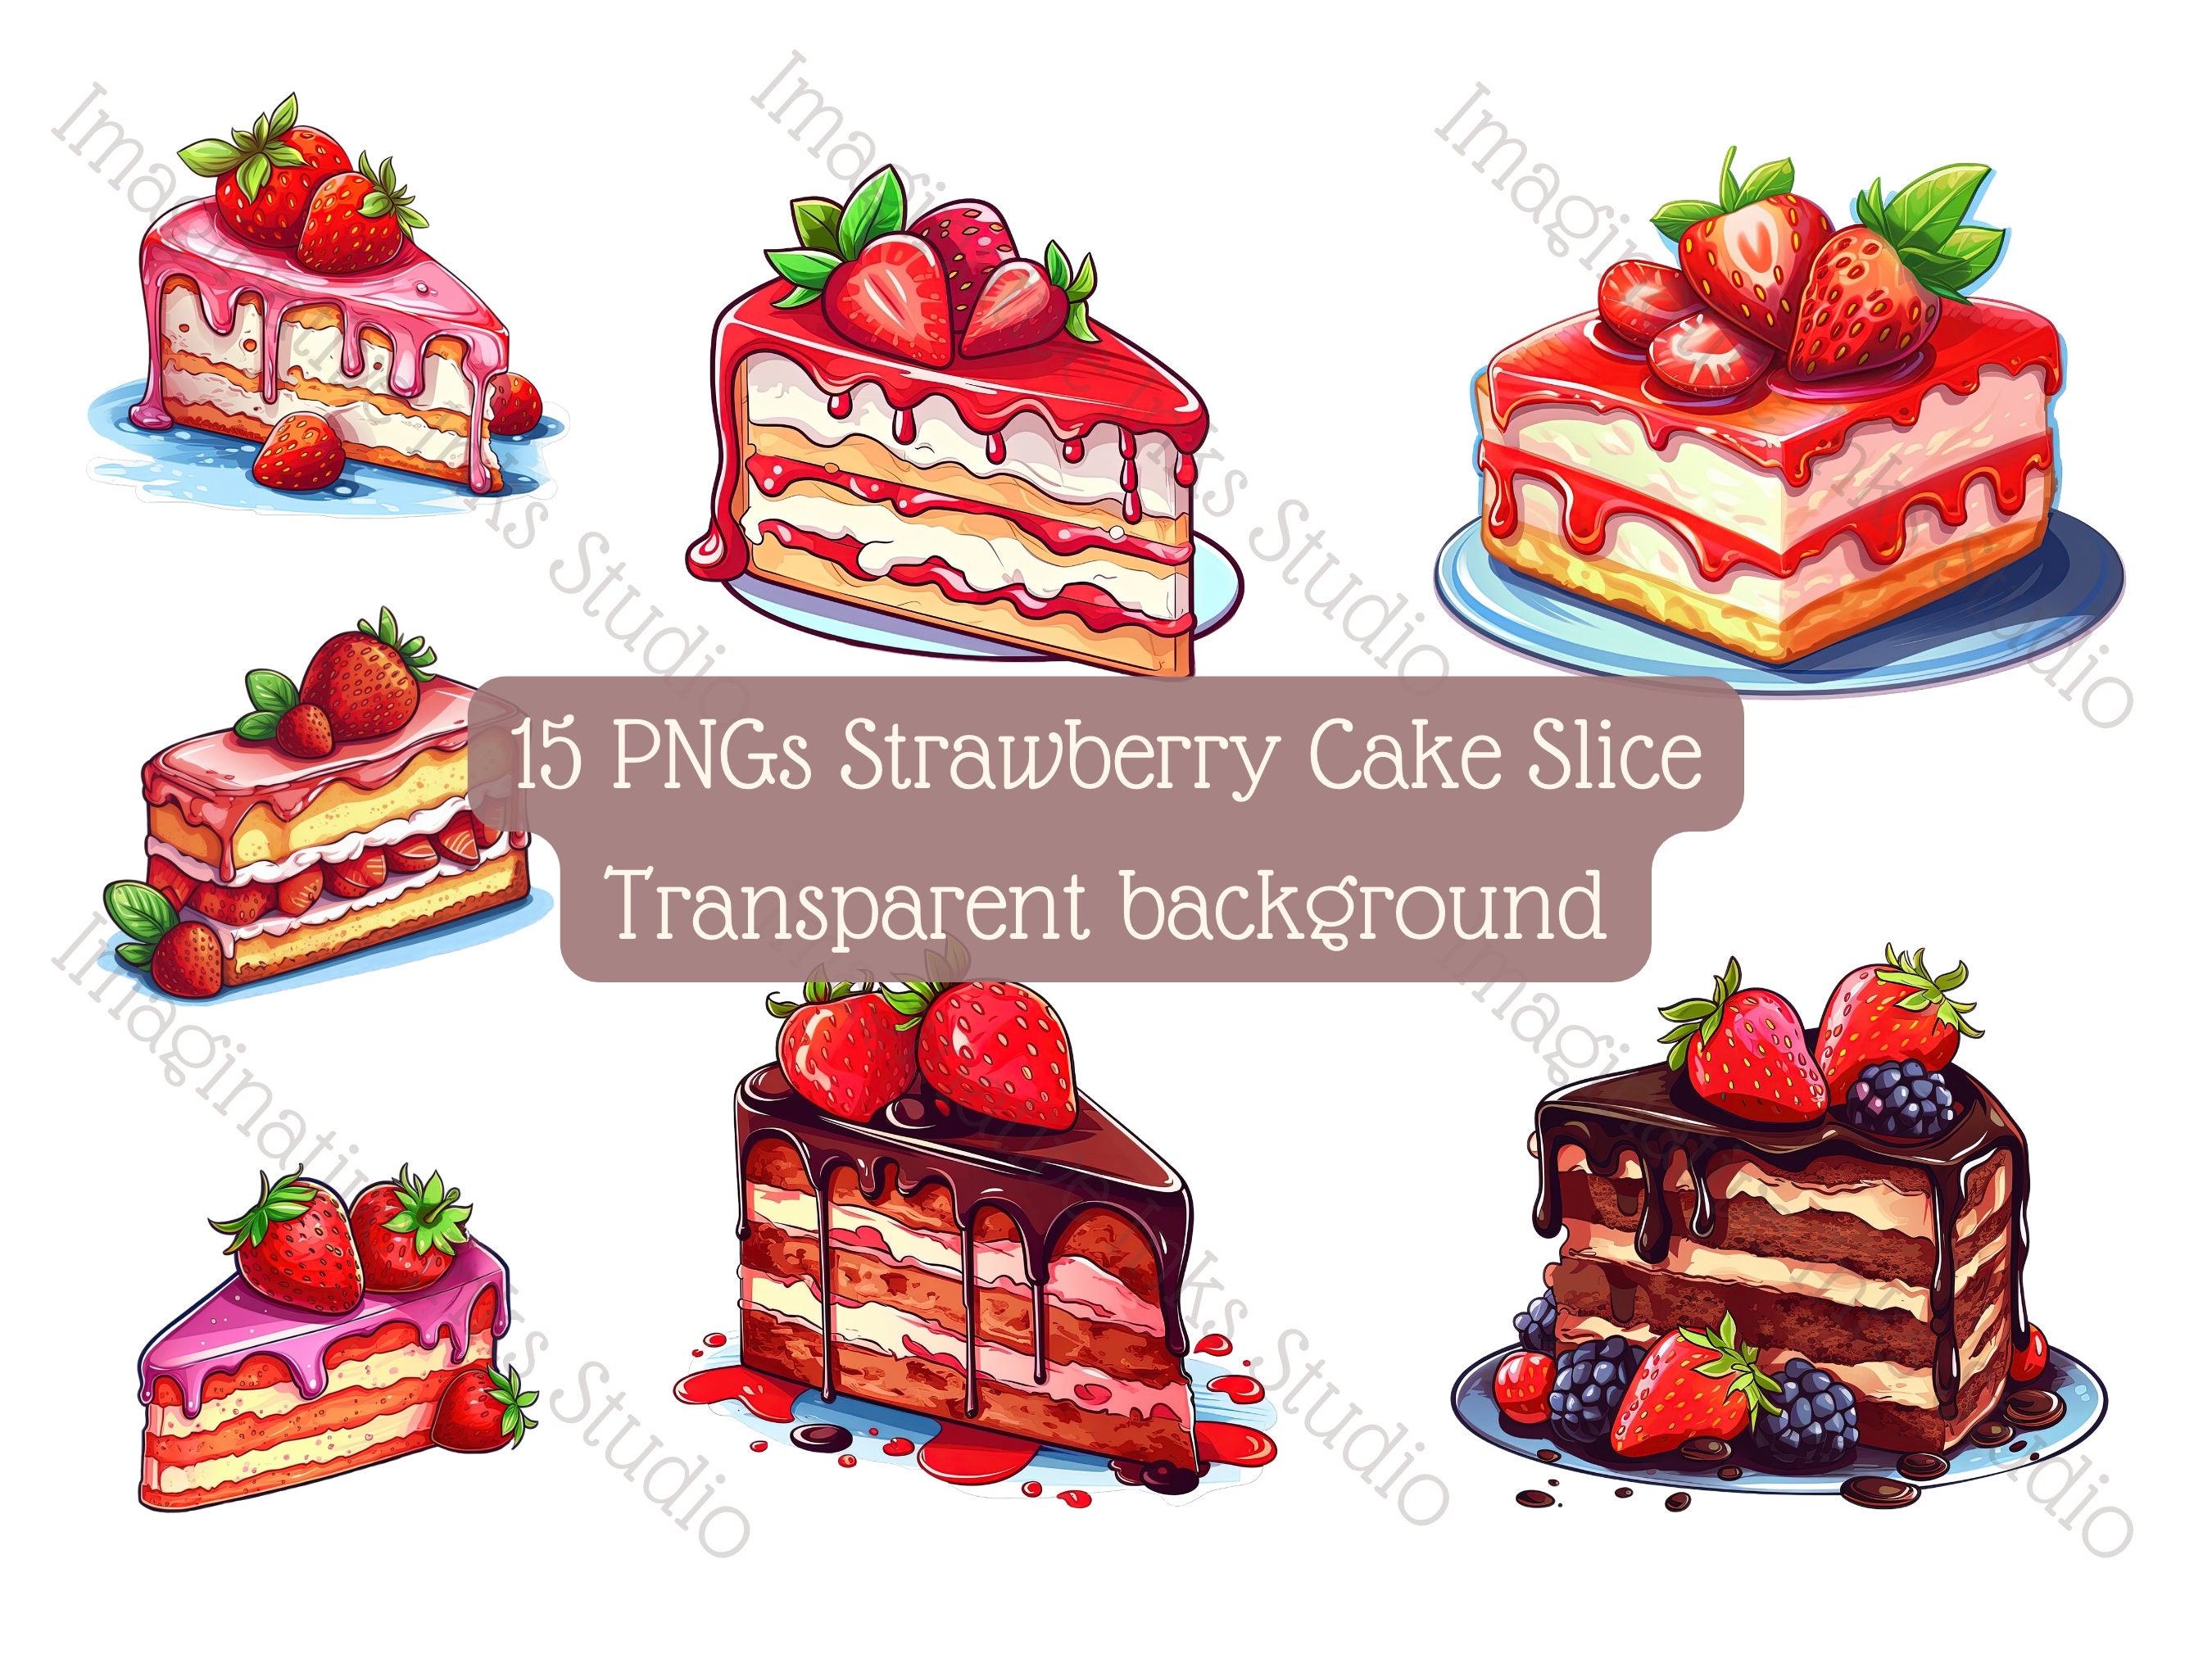 Clipart Cake Transparent Background - Large Cake Clip Art Transparent PNG -  450x600 - Free Download on NicePNG